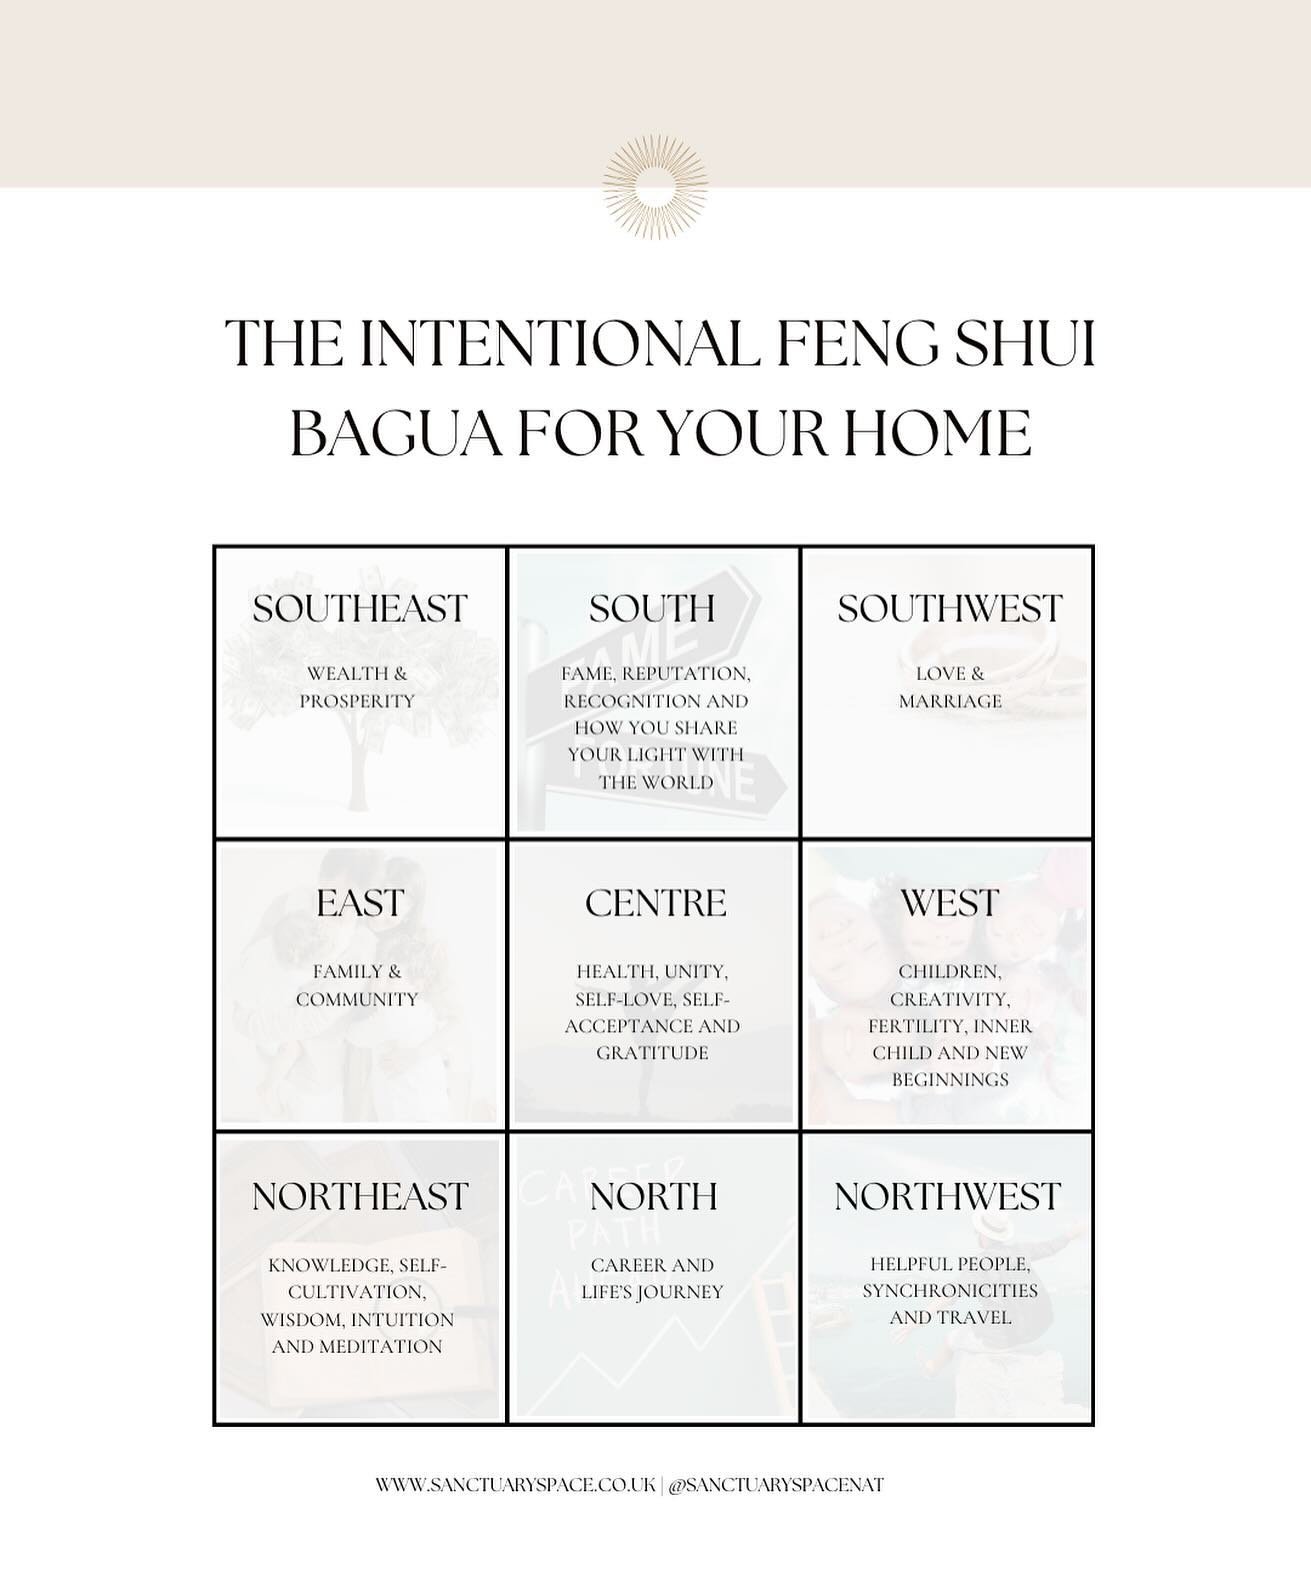 This is the quickest way to get started with Feng Shui 👆🏻

The 9-grid Bagua system has been used for thousands of years by Feng Shui experts to help people magnetise their goals and it's pretty simple to get started with.

All you have to do is ste